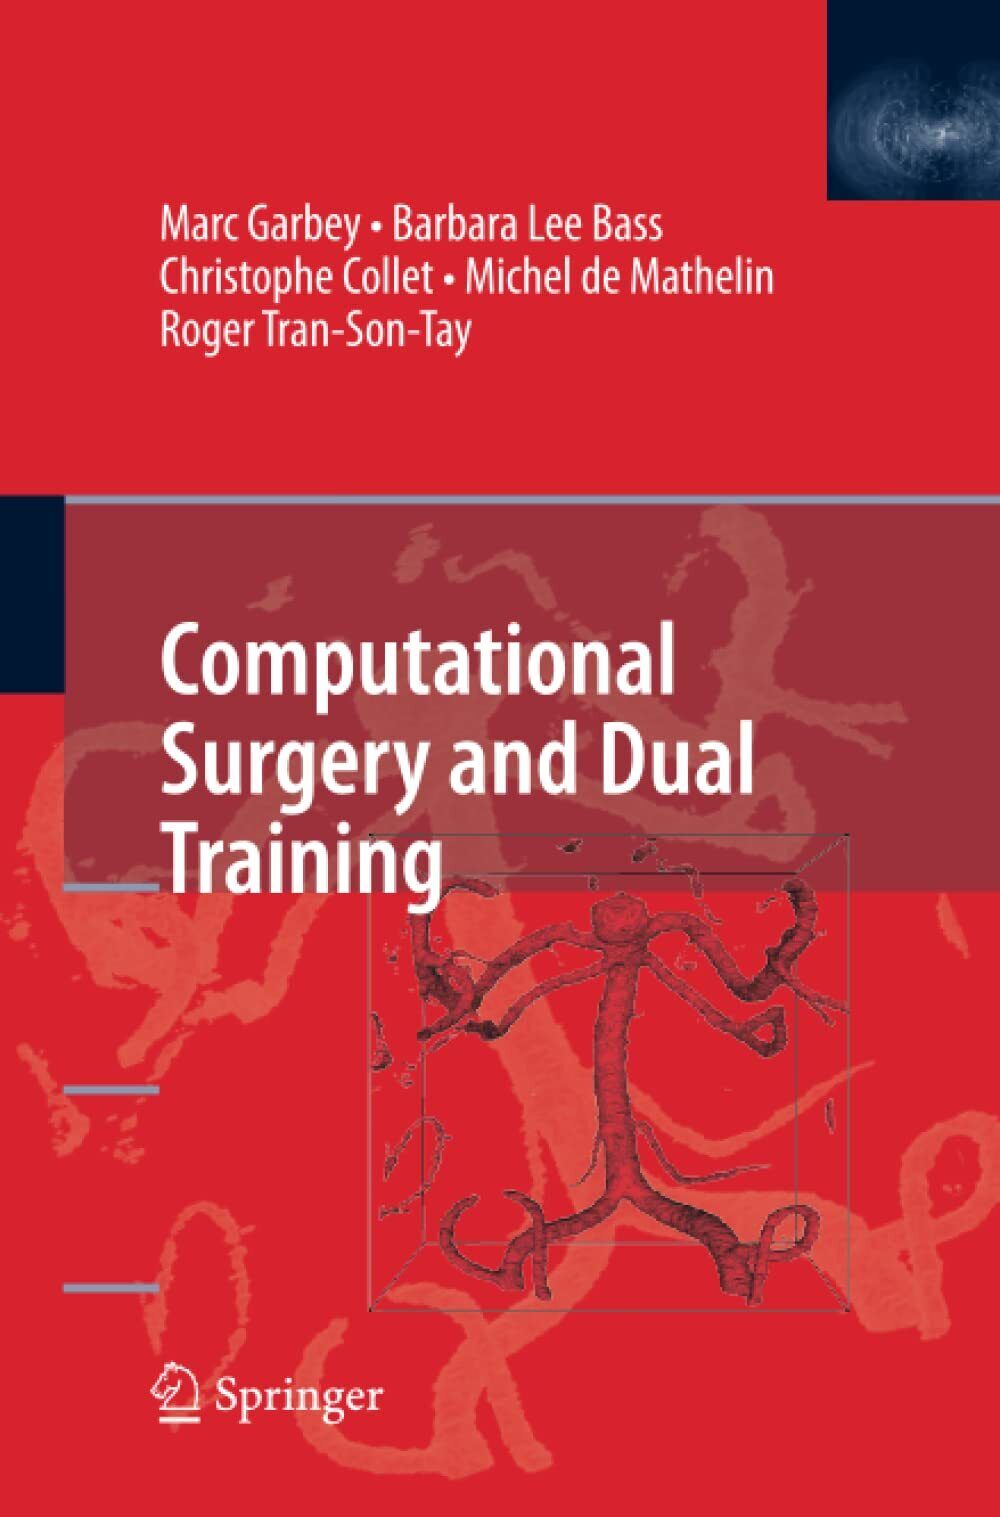 Computational Surgery and Dual Training - Marc Garbey - Springer, 2014